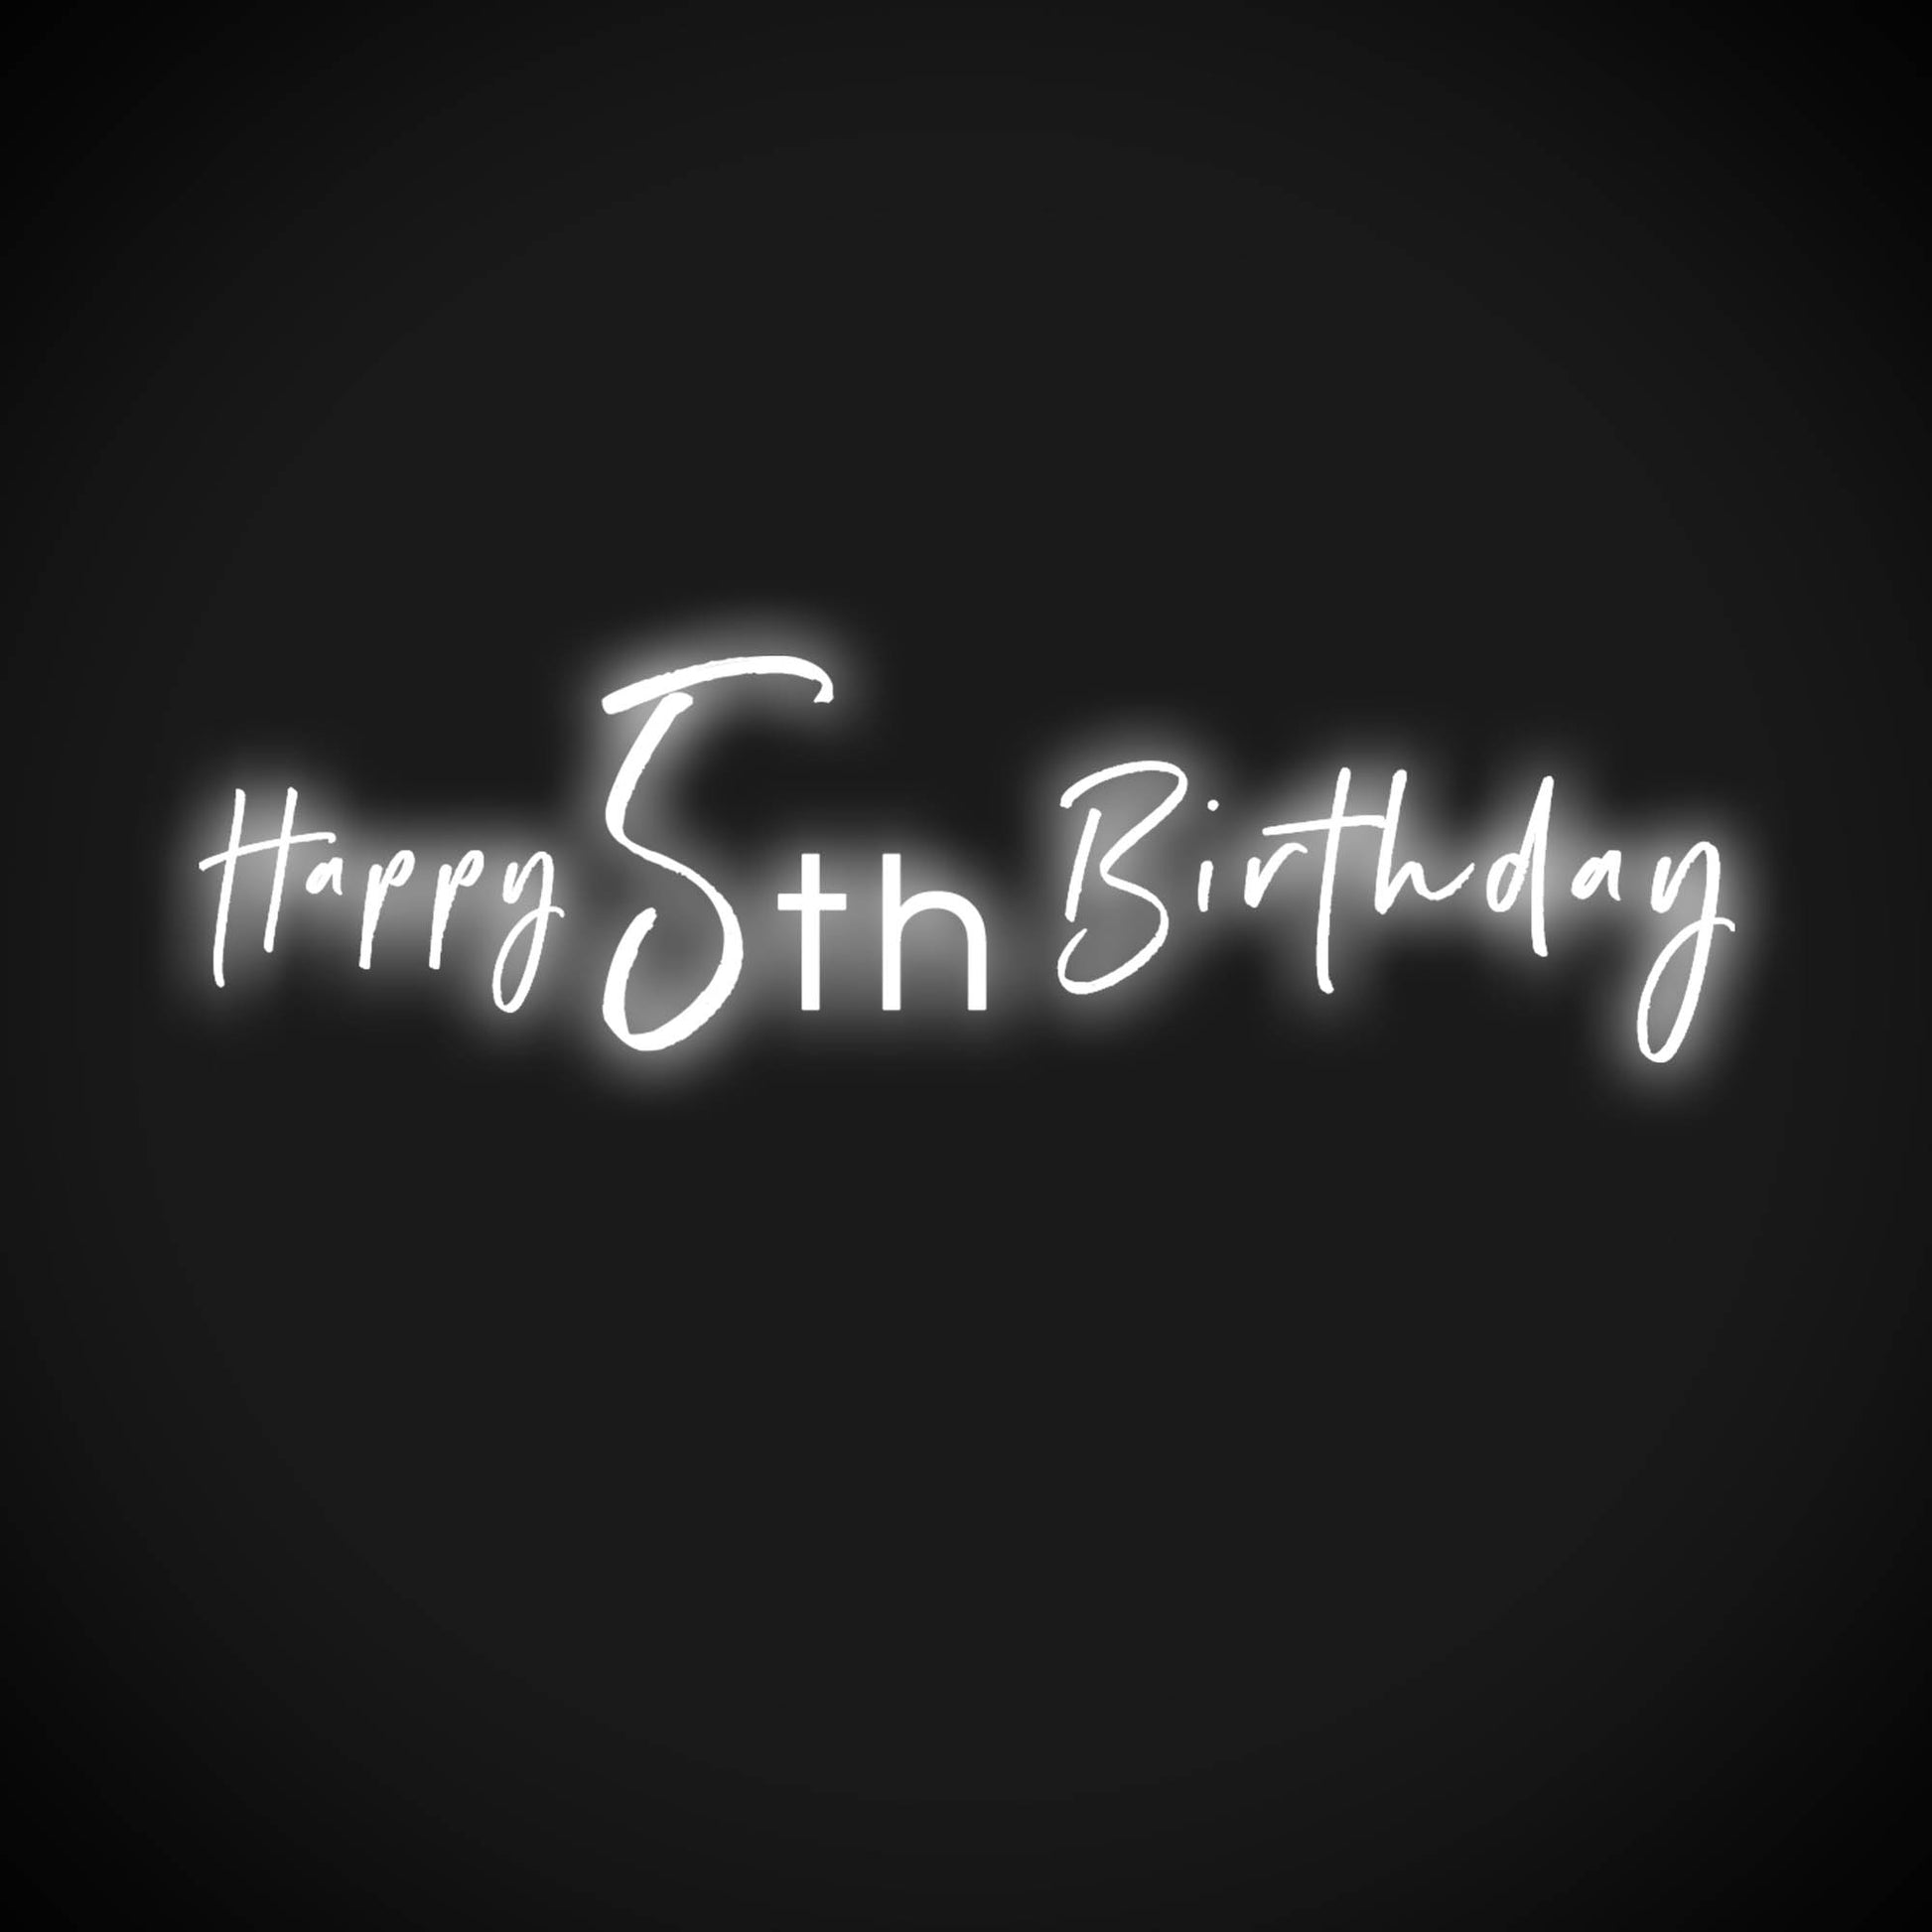 5th Birthday Neon Sign - Neon 5th Birthday Sign - Color White